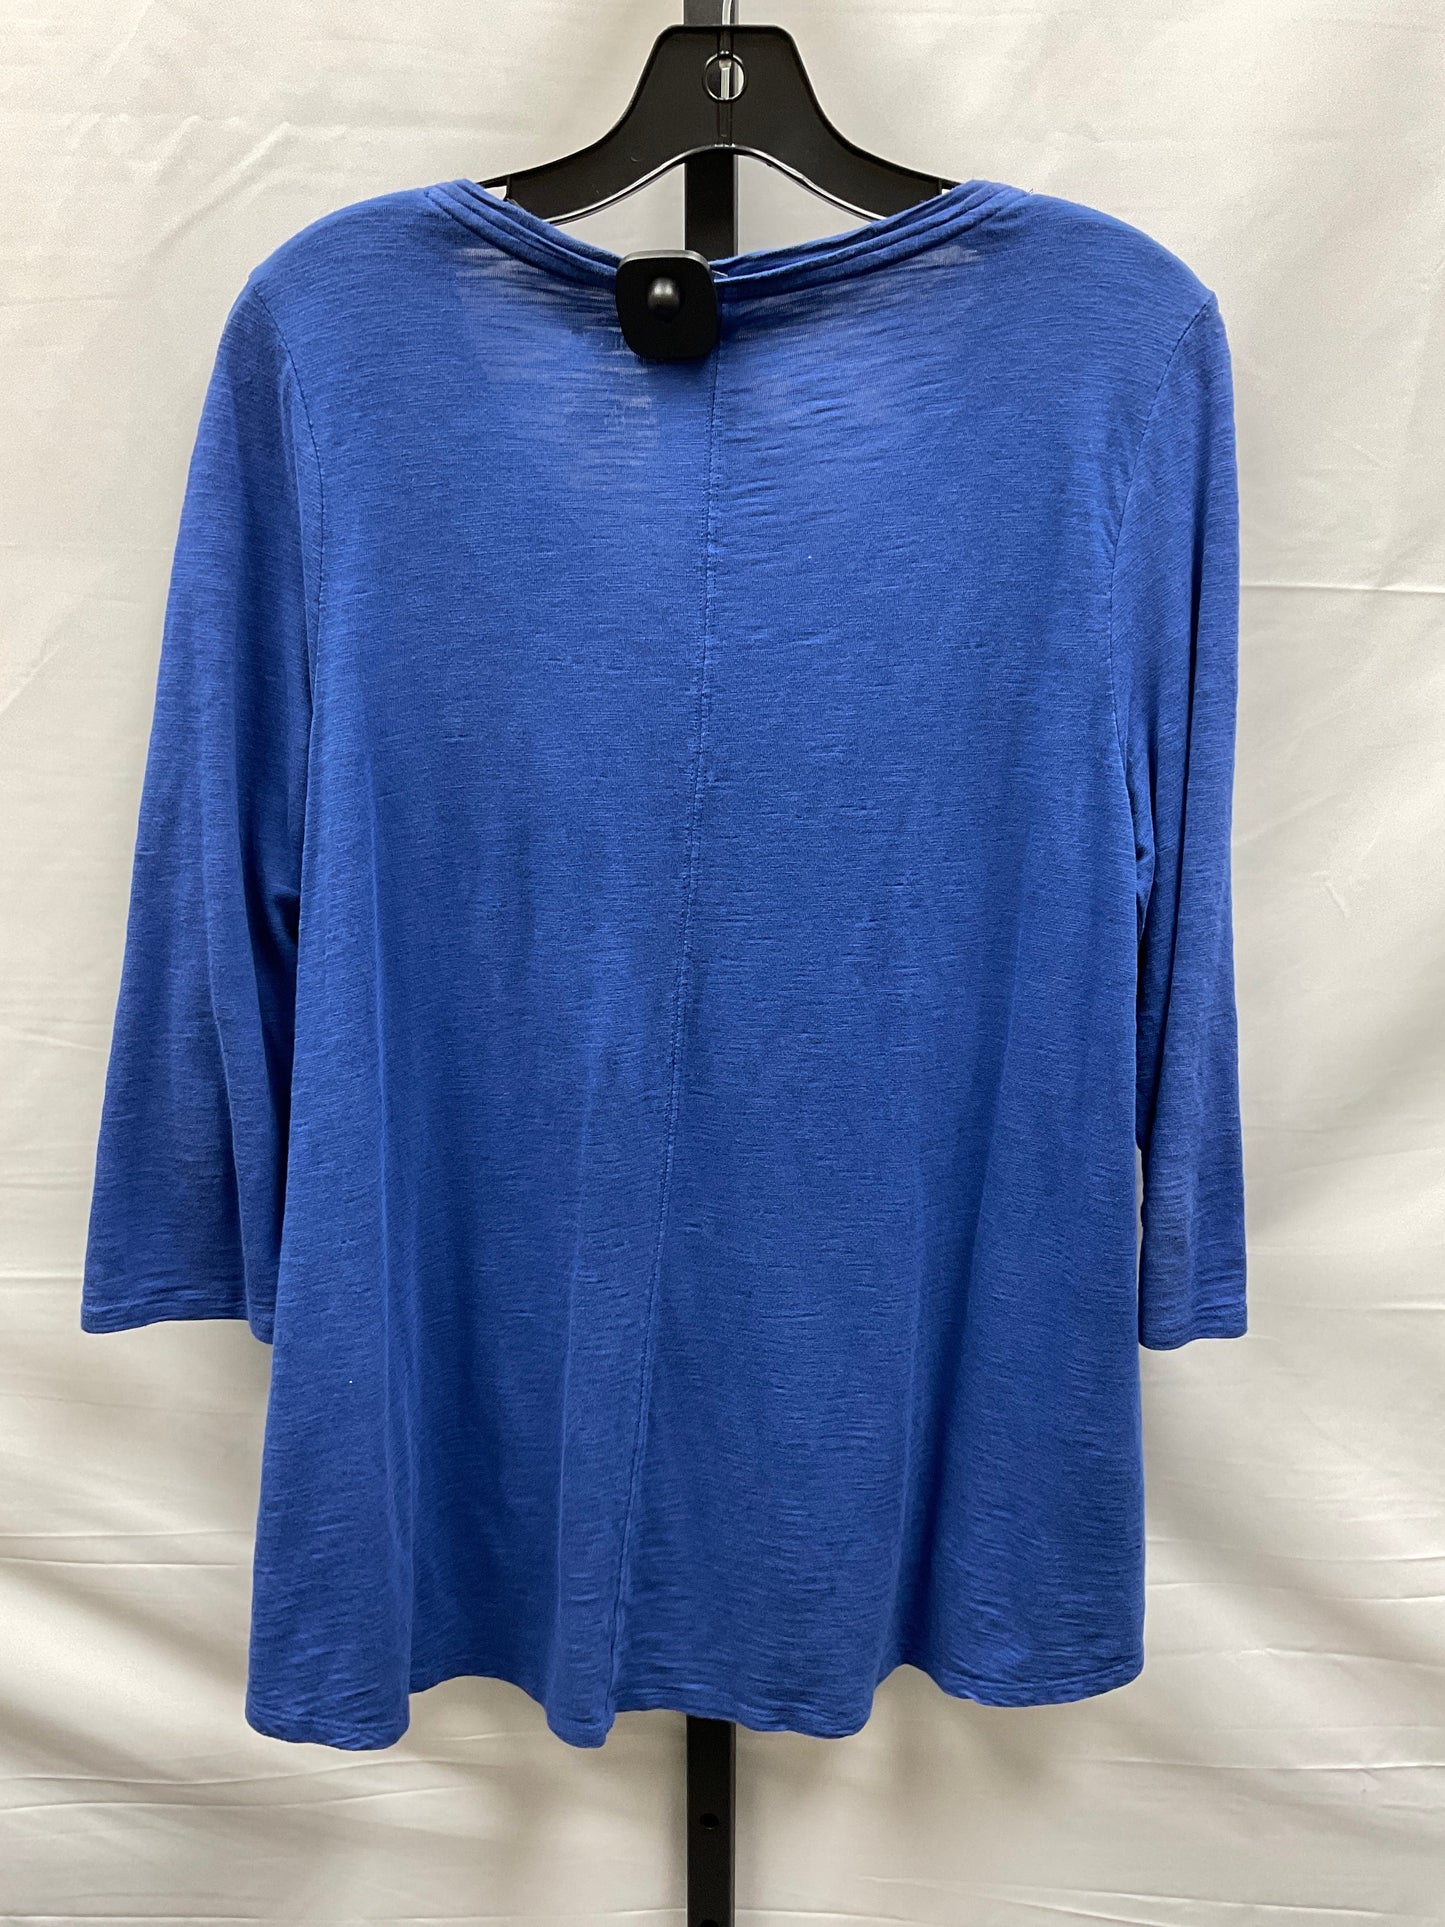 Blue Top 3/4 Sleeve Basic Chicos, Size M